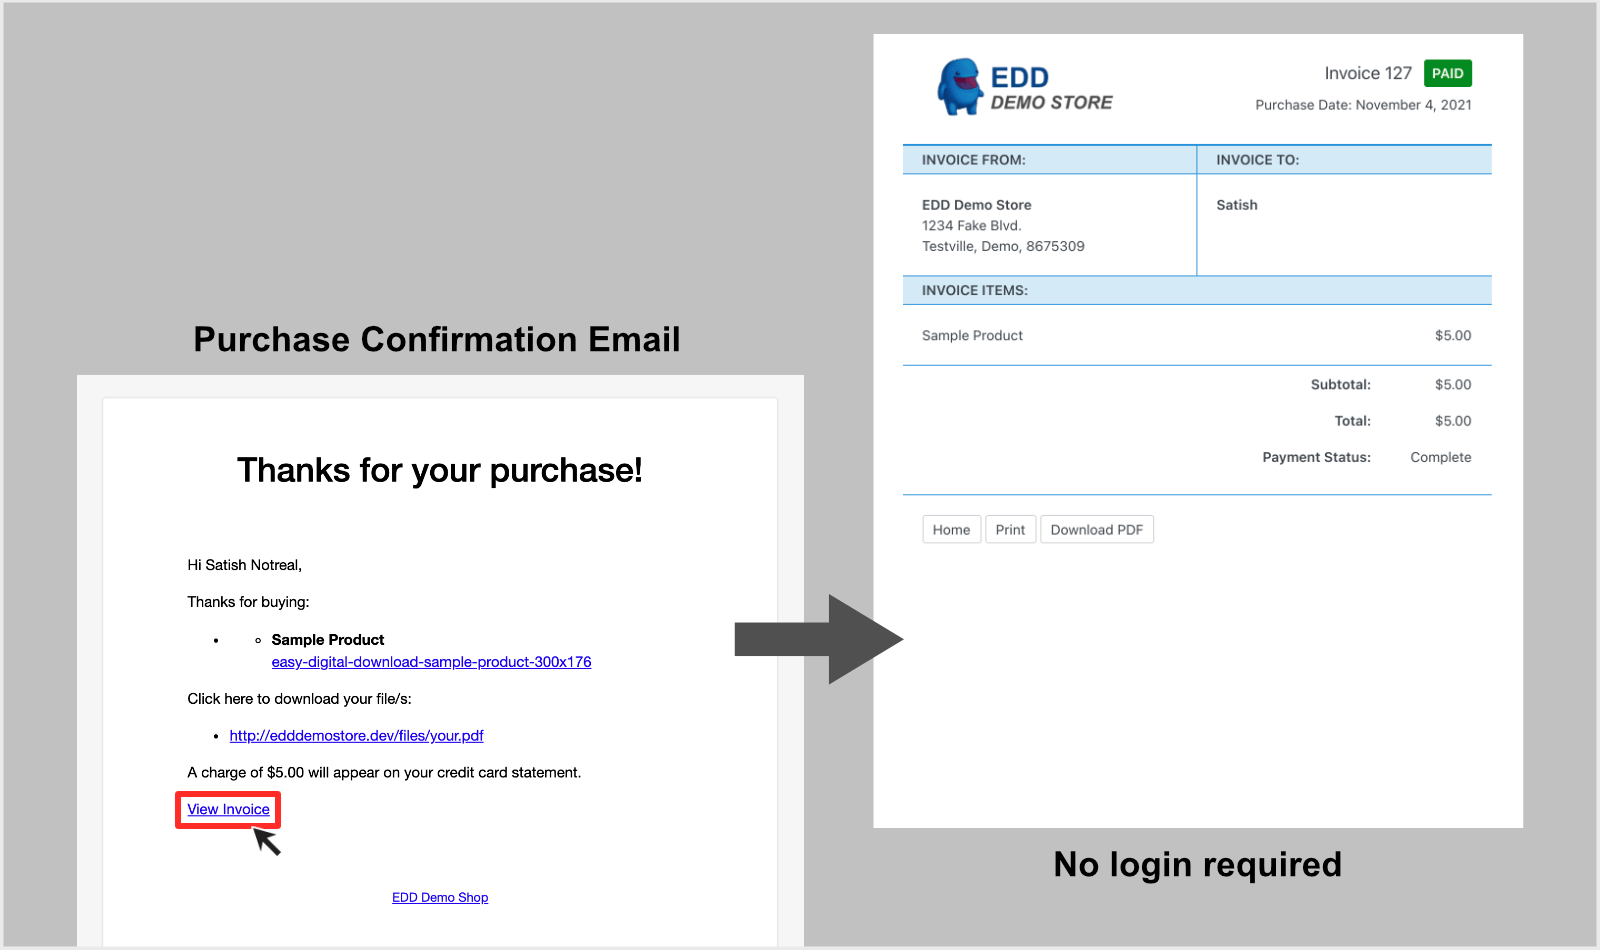 Illustration: click on View Invoice to view Invoice without logging in